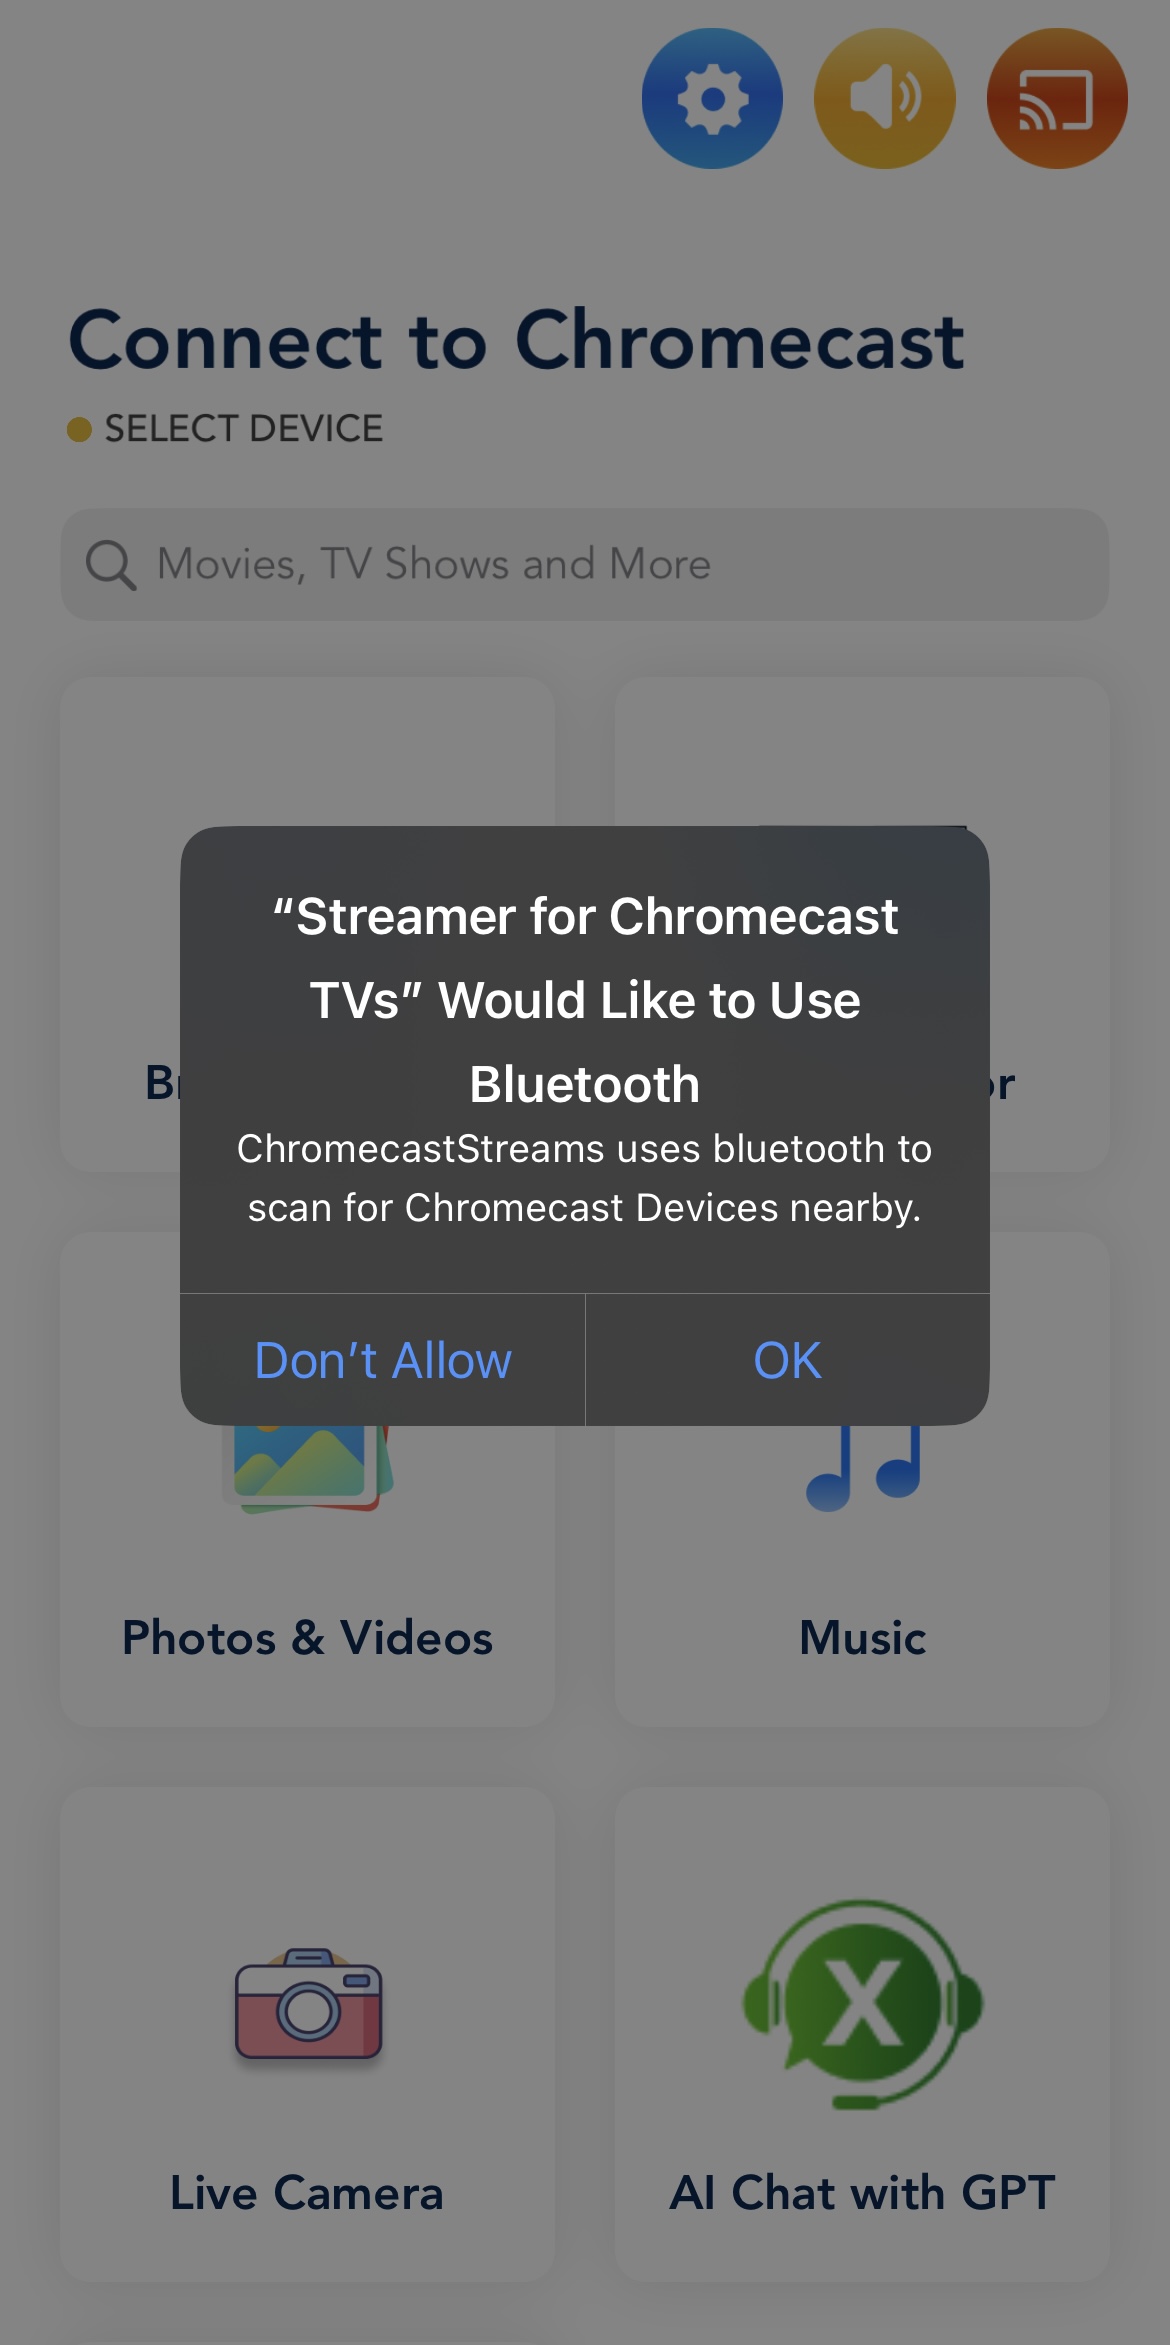 Giving Streamer for Chromecast TVs permission to use Bluetooth on iPhone